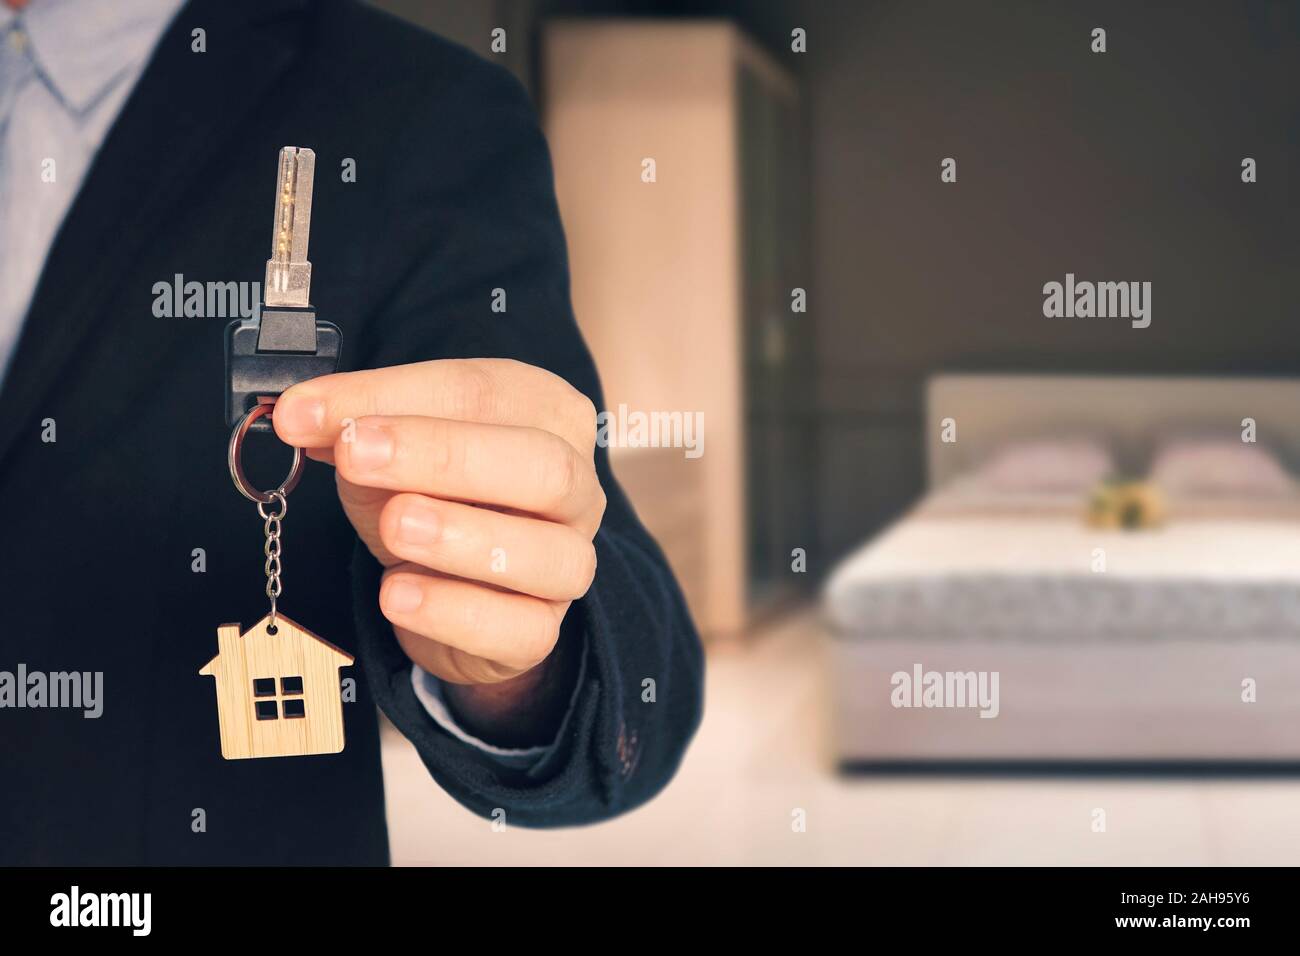 Man shows keys with keychain in form of a little house into a new flat. blurred background of the bedroom room with a modern interior. Stock Photo